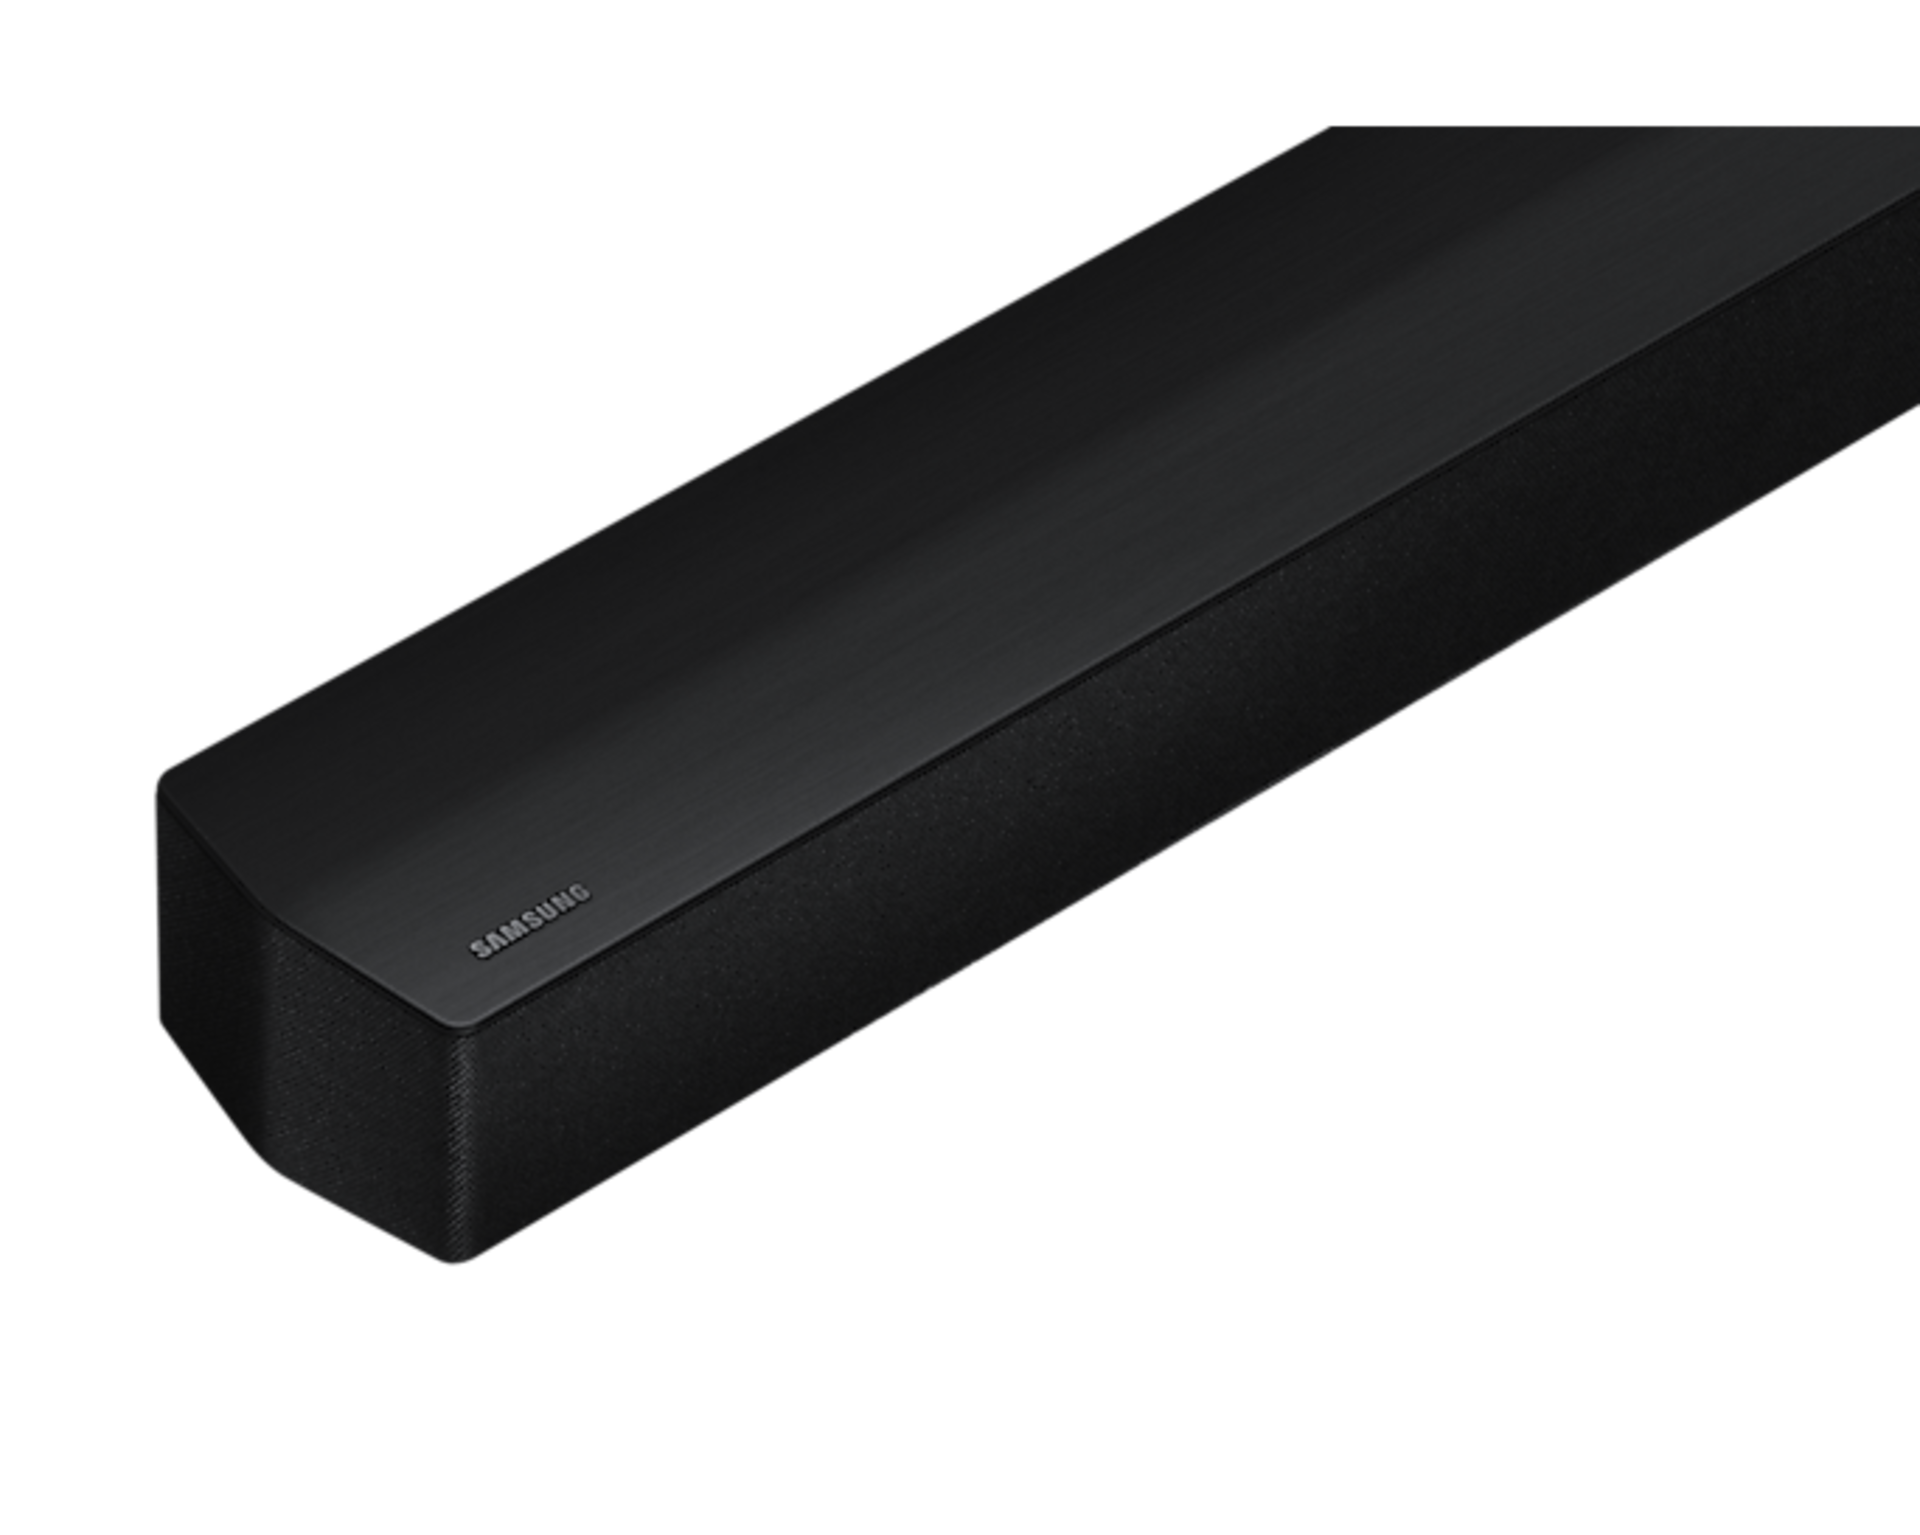 SAMSUNG HW-B430 BLUETOOTH 2.1 SOUNDBAR AND WIRELESS SUBWOOFER IN BLACK - RRP £199 - Image 7 of 13